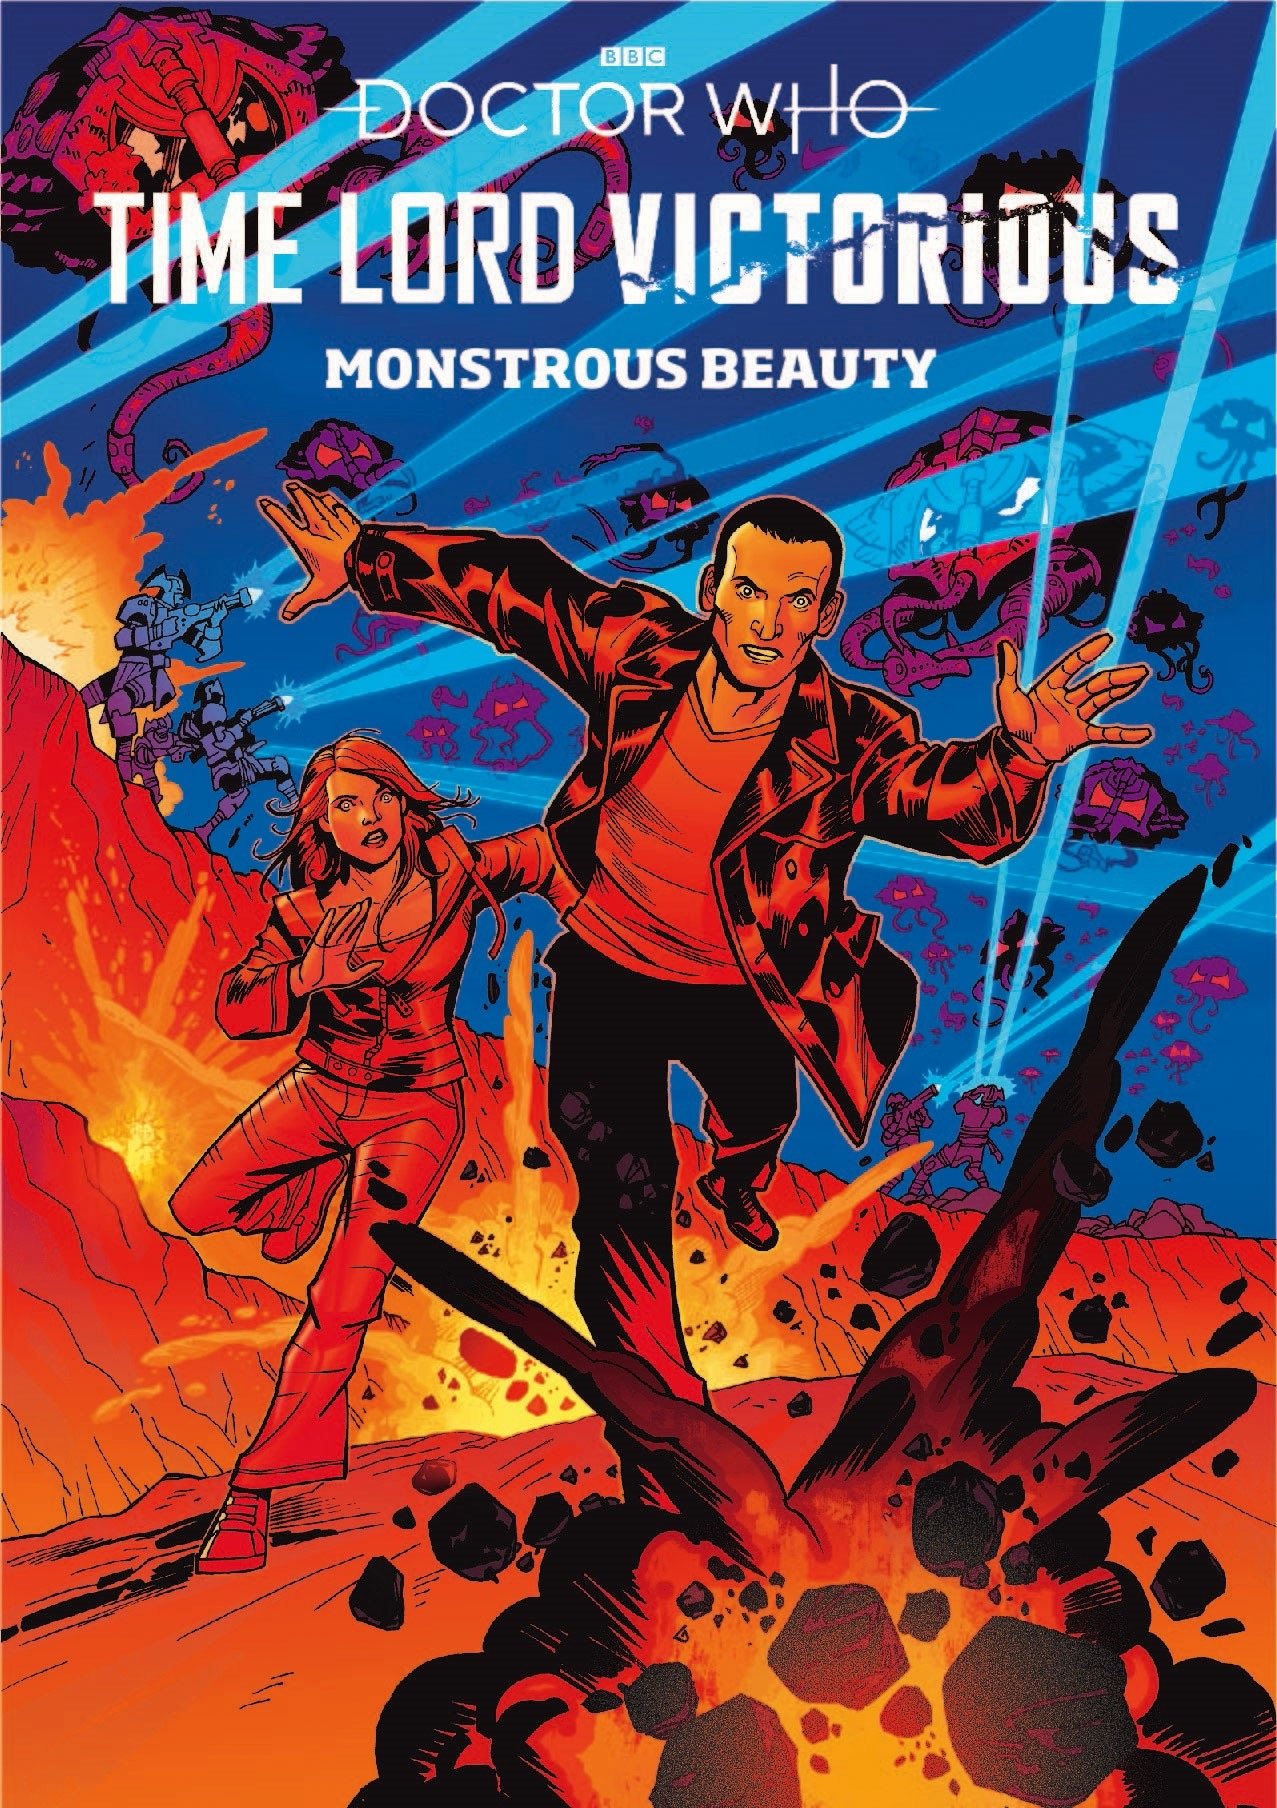 Reviewed: Time Lord Victorious – Monstrous Beauty Part One